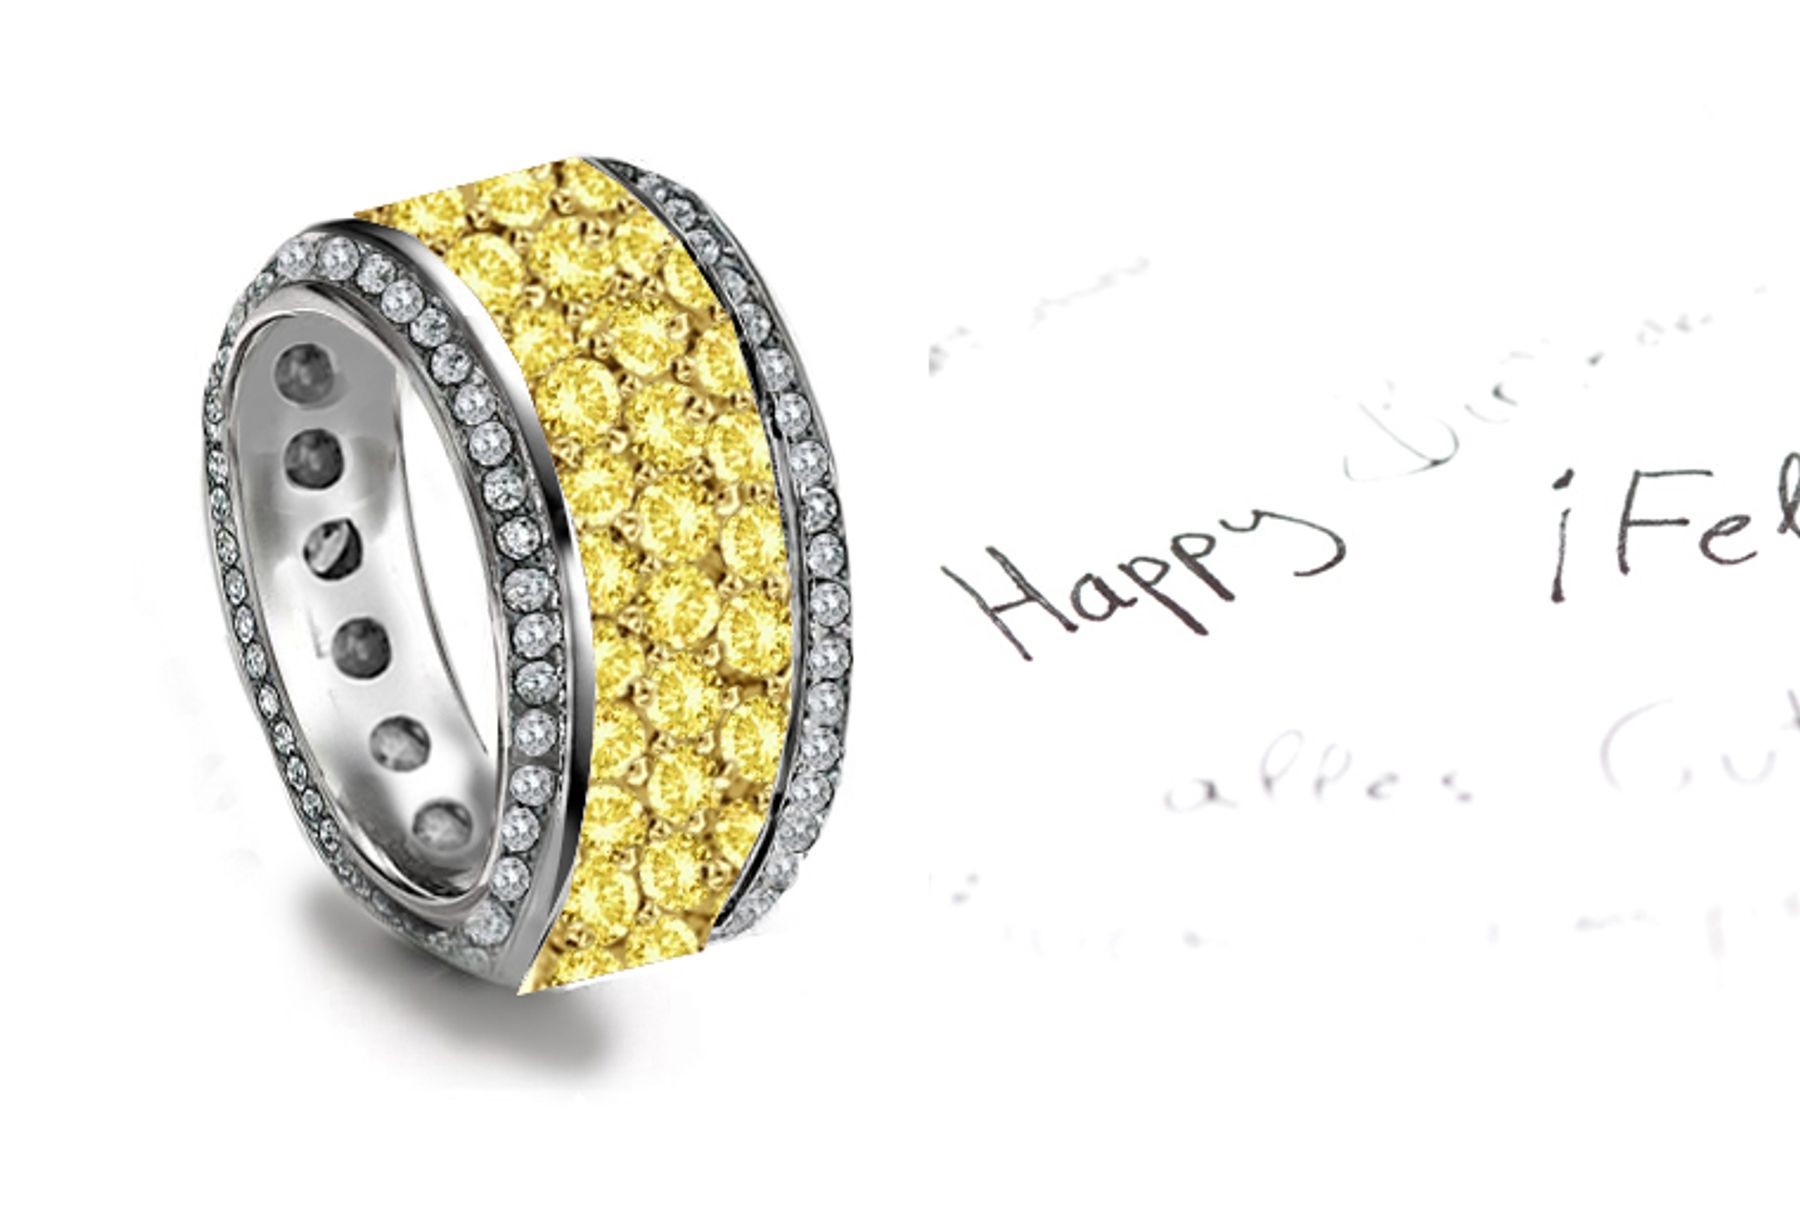 Magical: 6 mm Wide Micropavee Crusted Yellow Diamonds in Center & Diamond Decorated Sides 